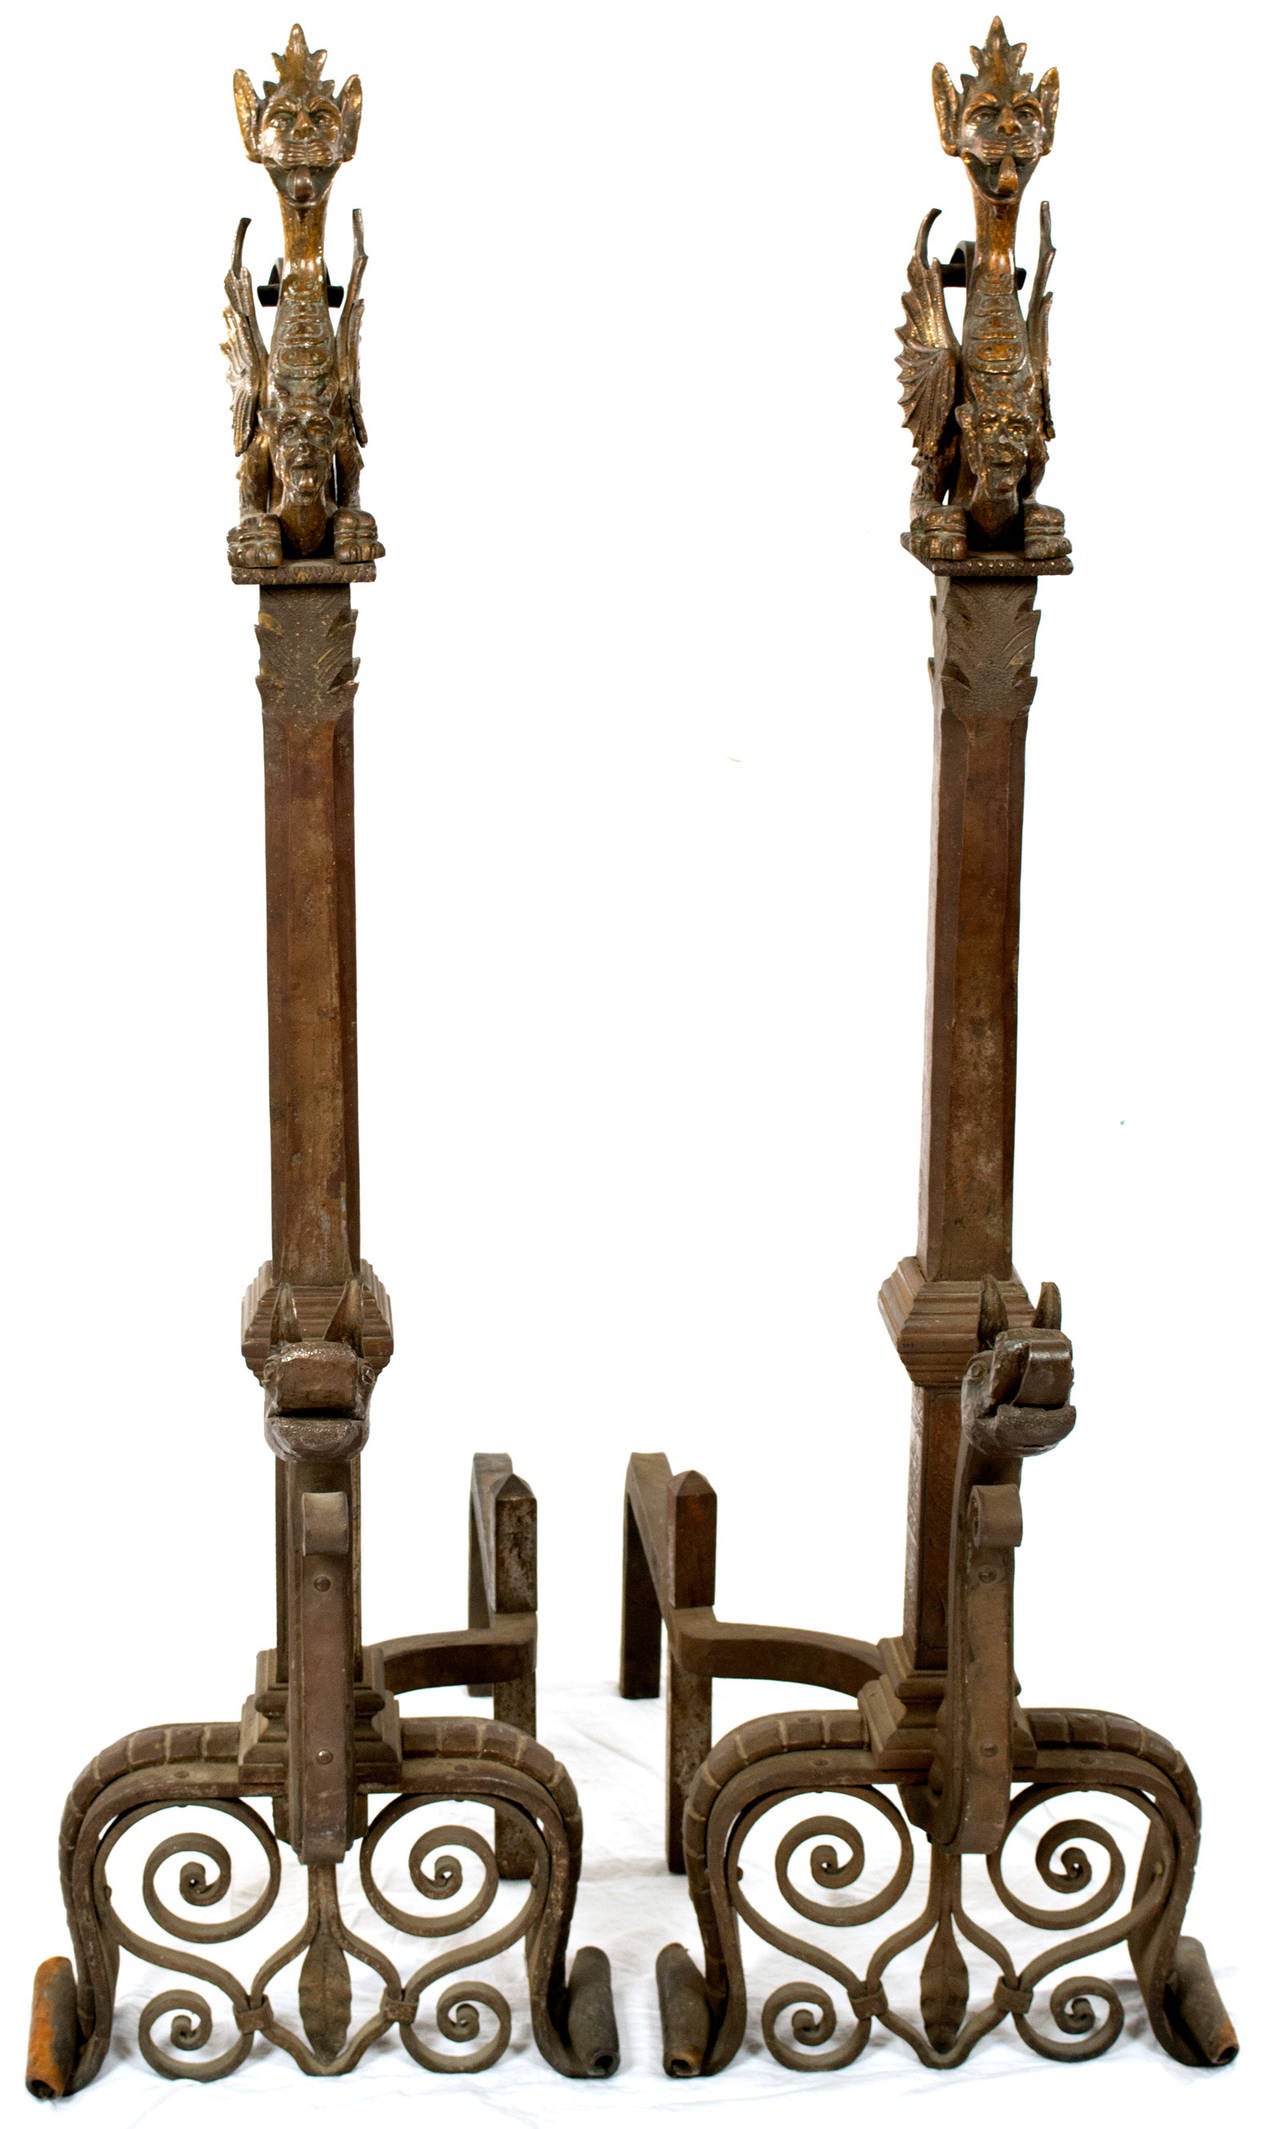 Two andirons inspired by the designs of the French architect Eugène Violet-le-Duc (1814 - 1879), who was responsible for the restoration of Notre Dame and an advocate for Gothic Revival. Featuring four dragons, two at the base in wrought iron, and